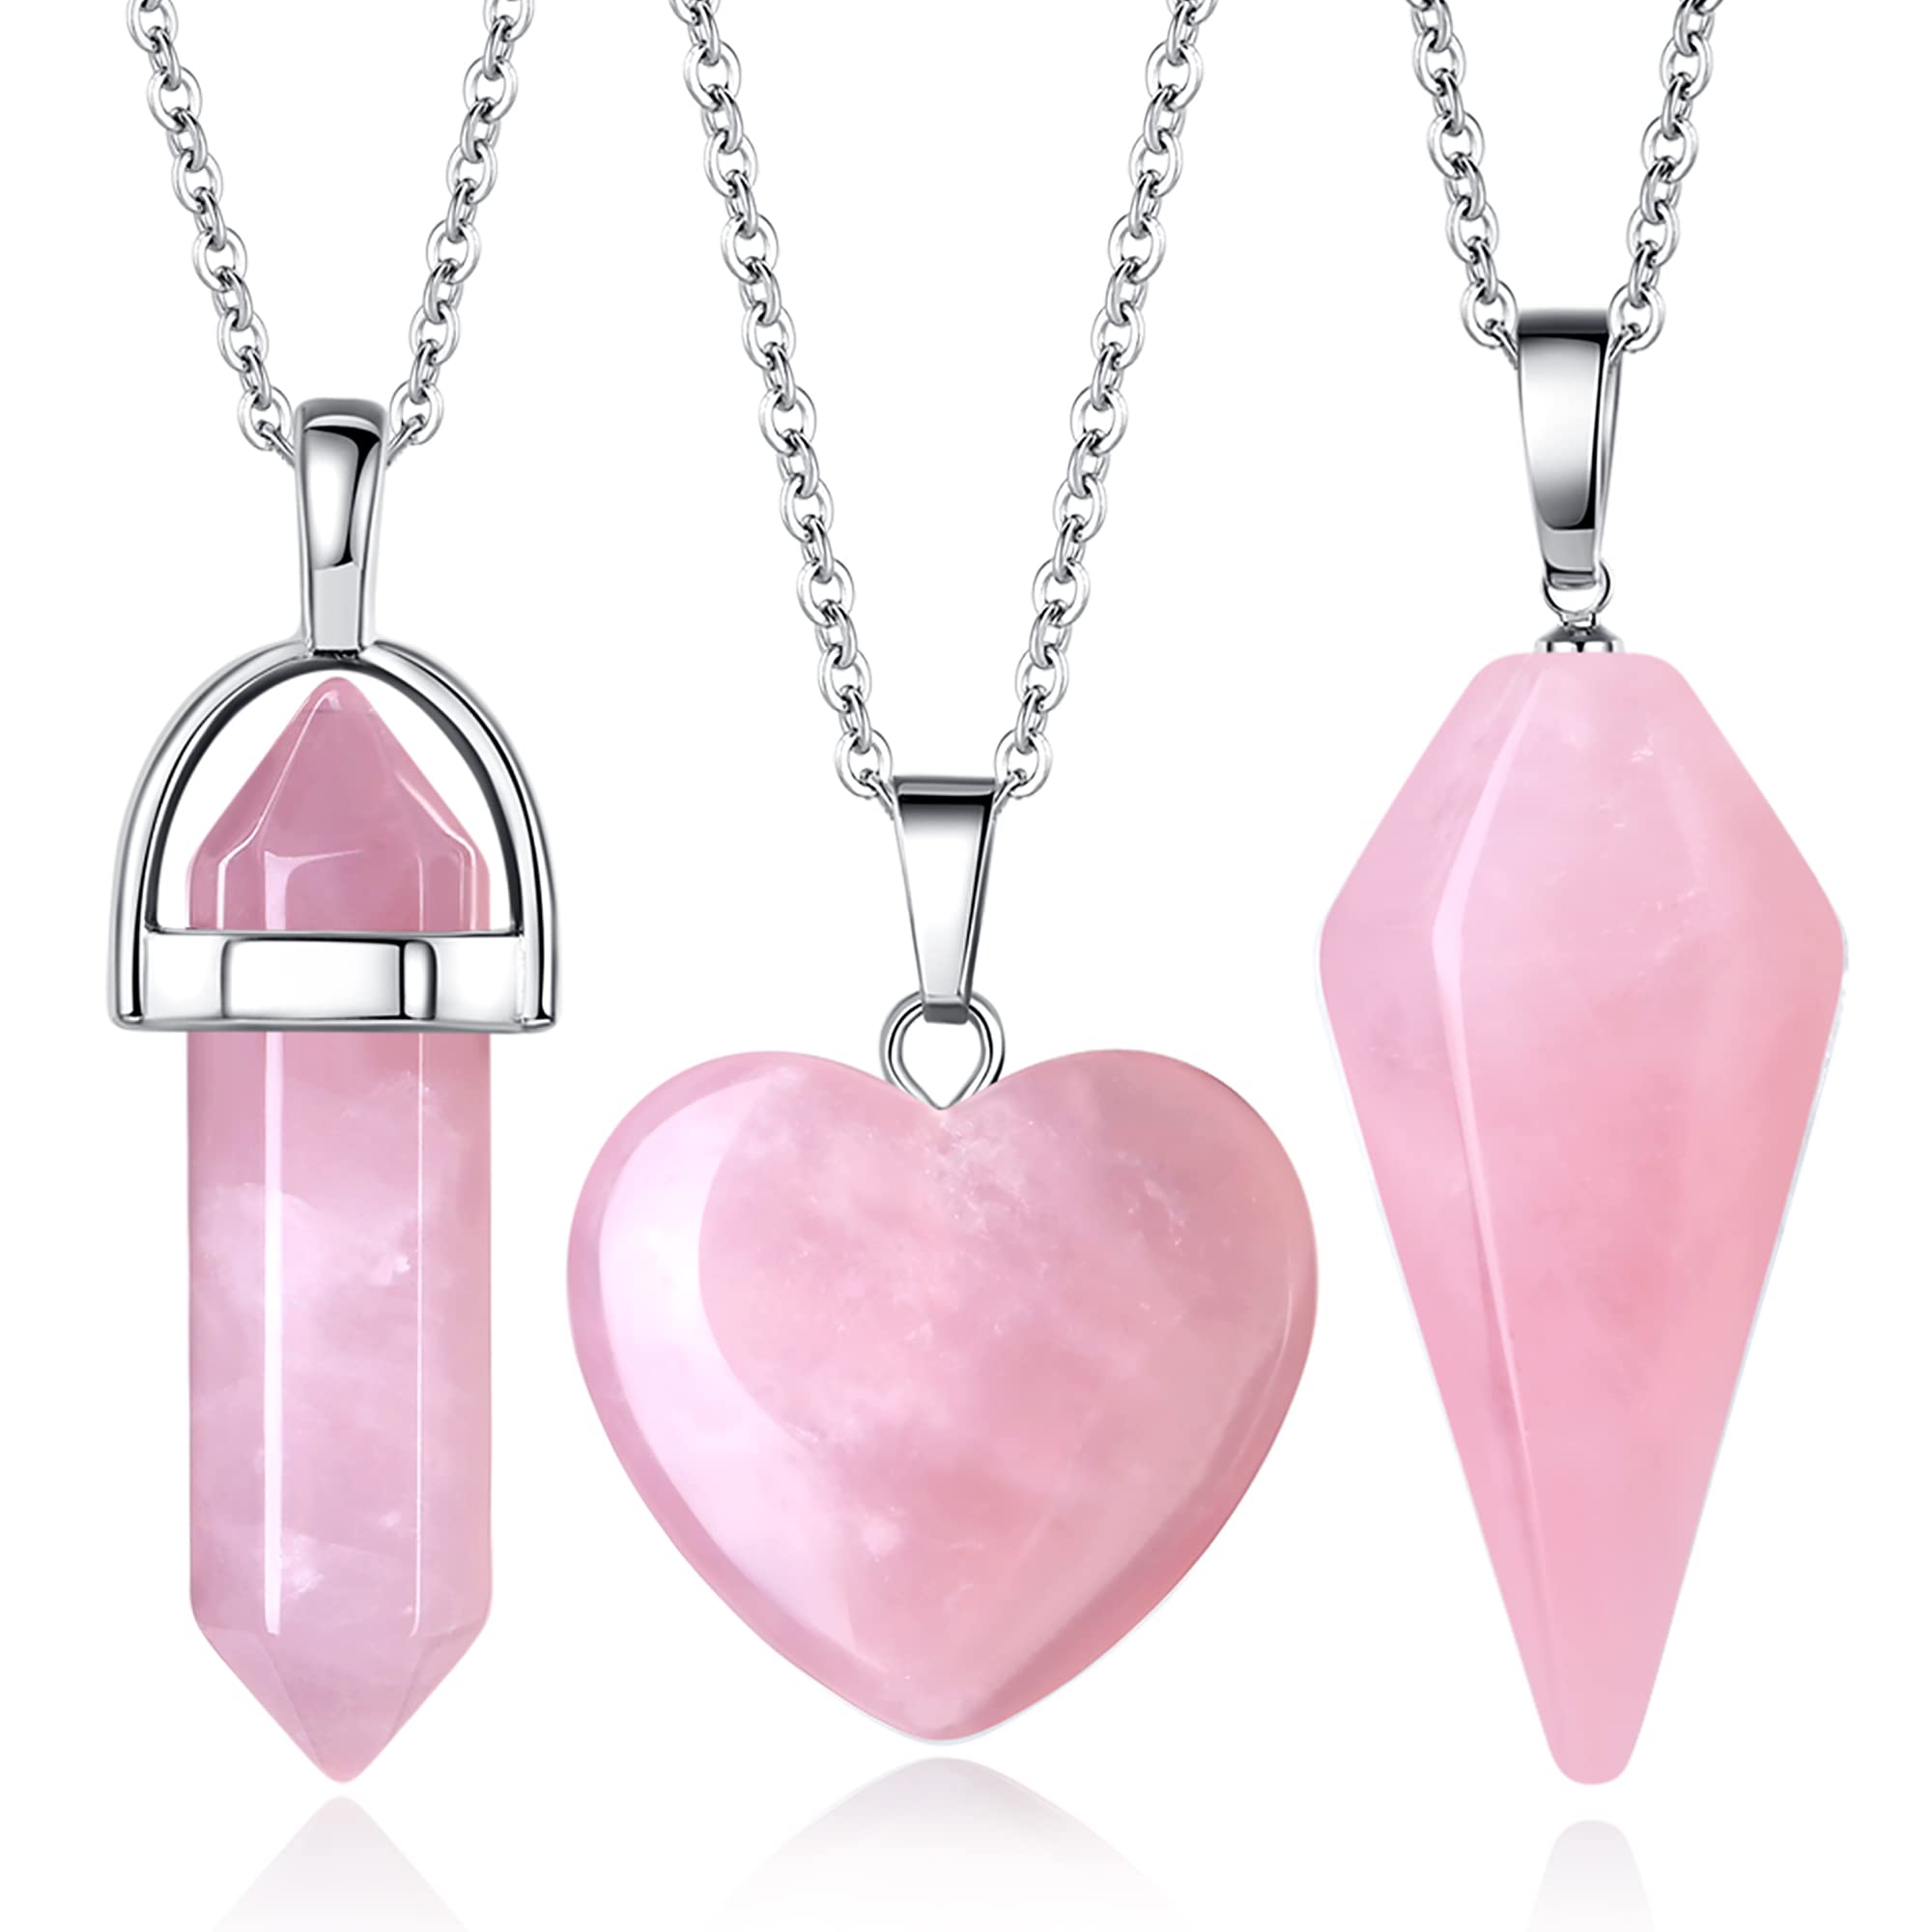 QINJIEJIE Healing Crystal Necklaces Set for Women Necklaces Rose Crystals Quartz Stone Pendant Jewelry Natural Pink Gemstone Heart Hexagonal Column Cone Spiritual Reiki Energy Witchcraft 3 Pcs